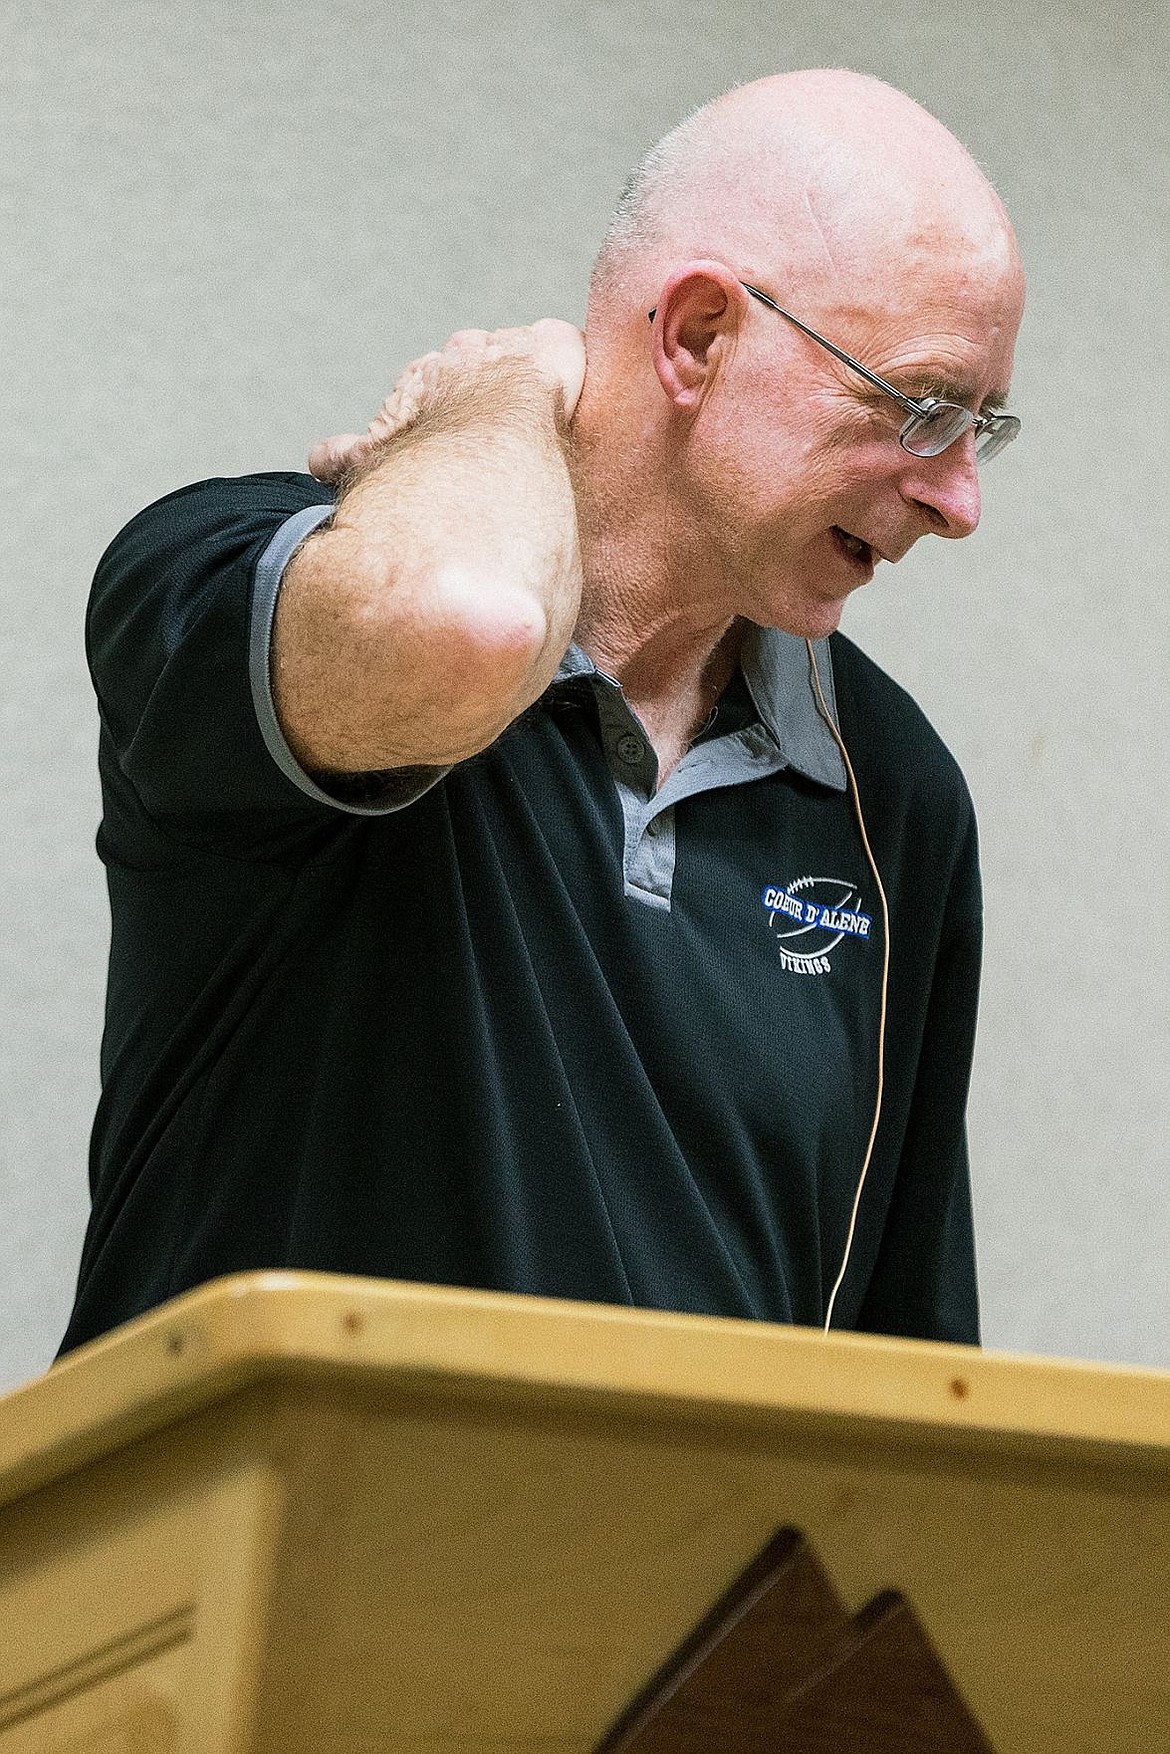 &lt;p&gt;Volunteer coach for the Coeur d&#146;Alene High football team Bruce Miller describes how doctors found tumors on his neck as he was battling cancer several years ago.&lt;/p&gt;